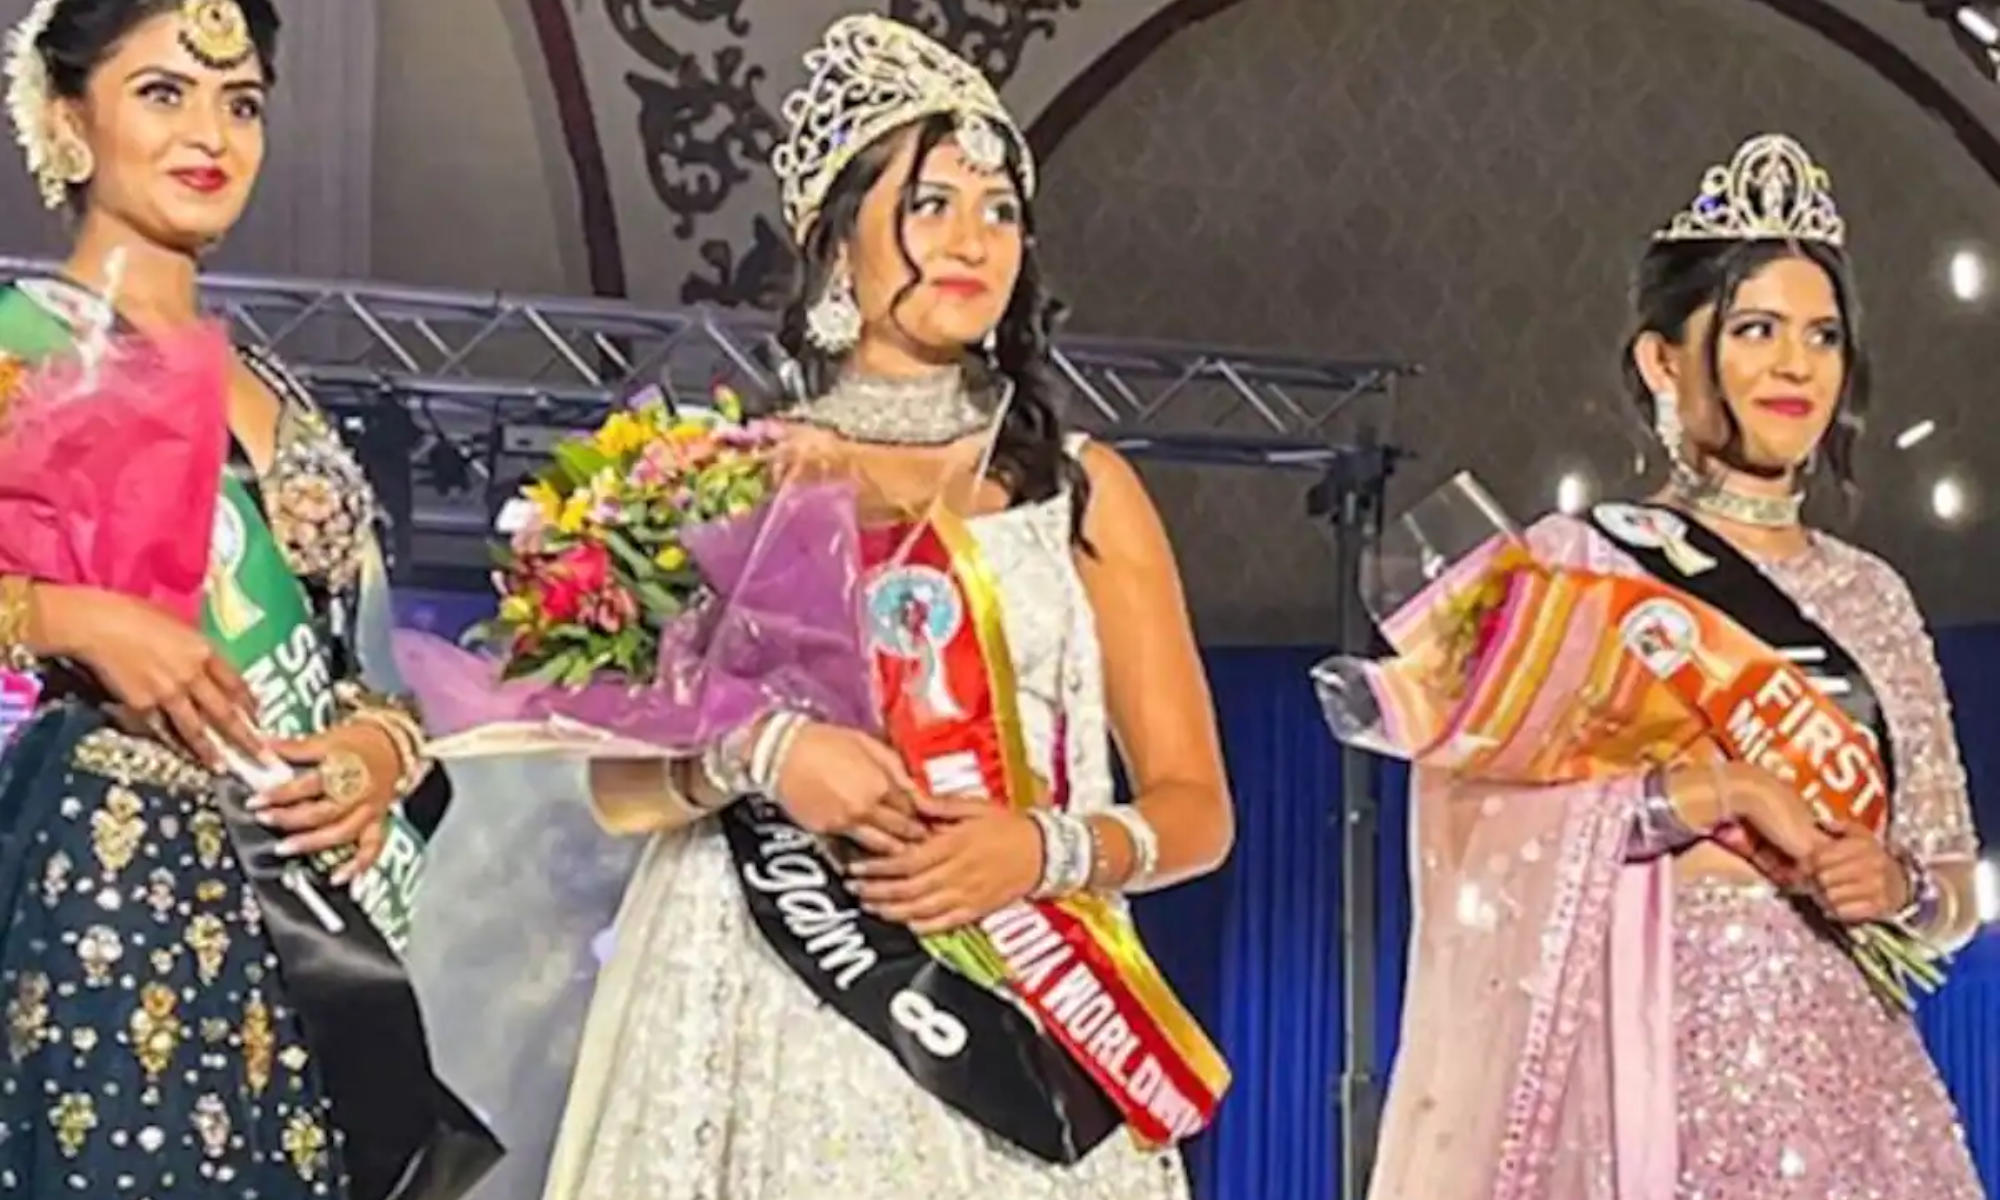 Khushi Patel from UK is crowned Miss India Worldwide 2022